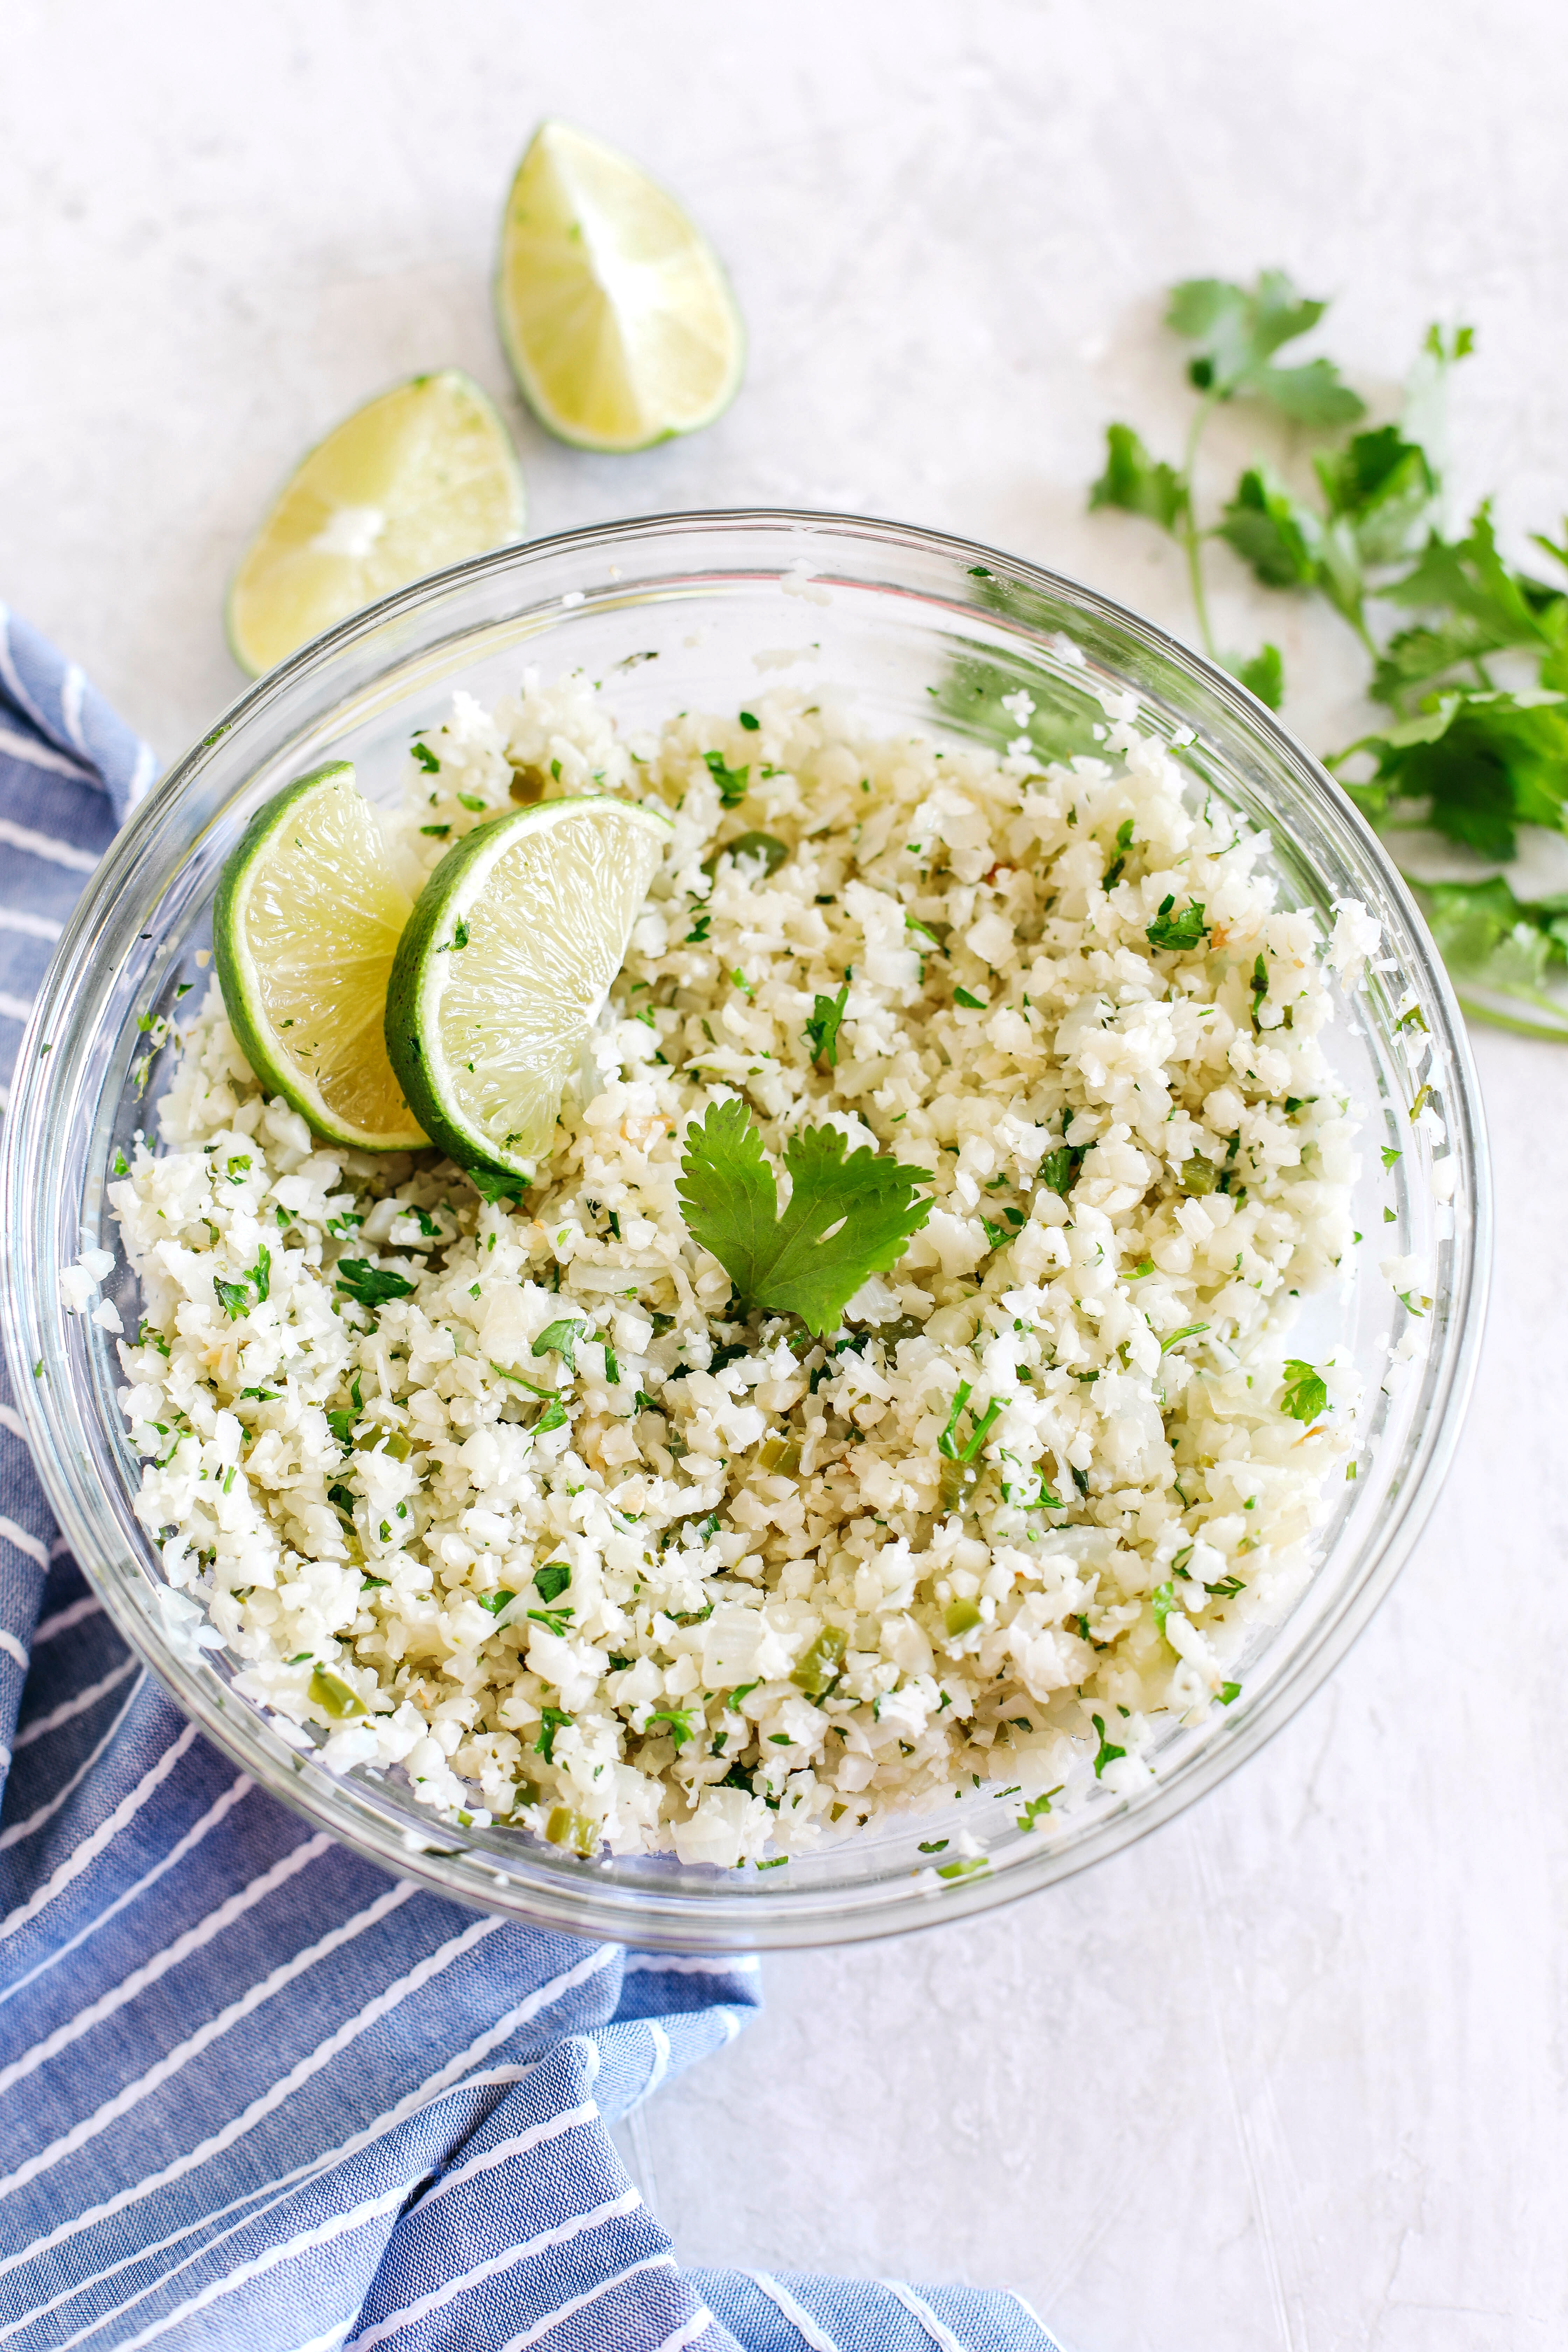 This Cilantro Lime Cauliflower Rice is the perfect low carb side dish that is healthy, delicious and easily made in minutes with just a few simple ingredients!